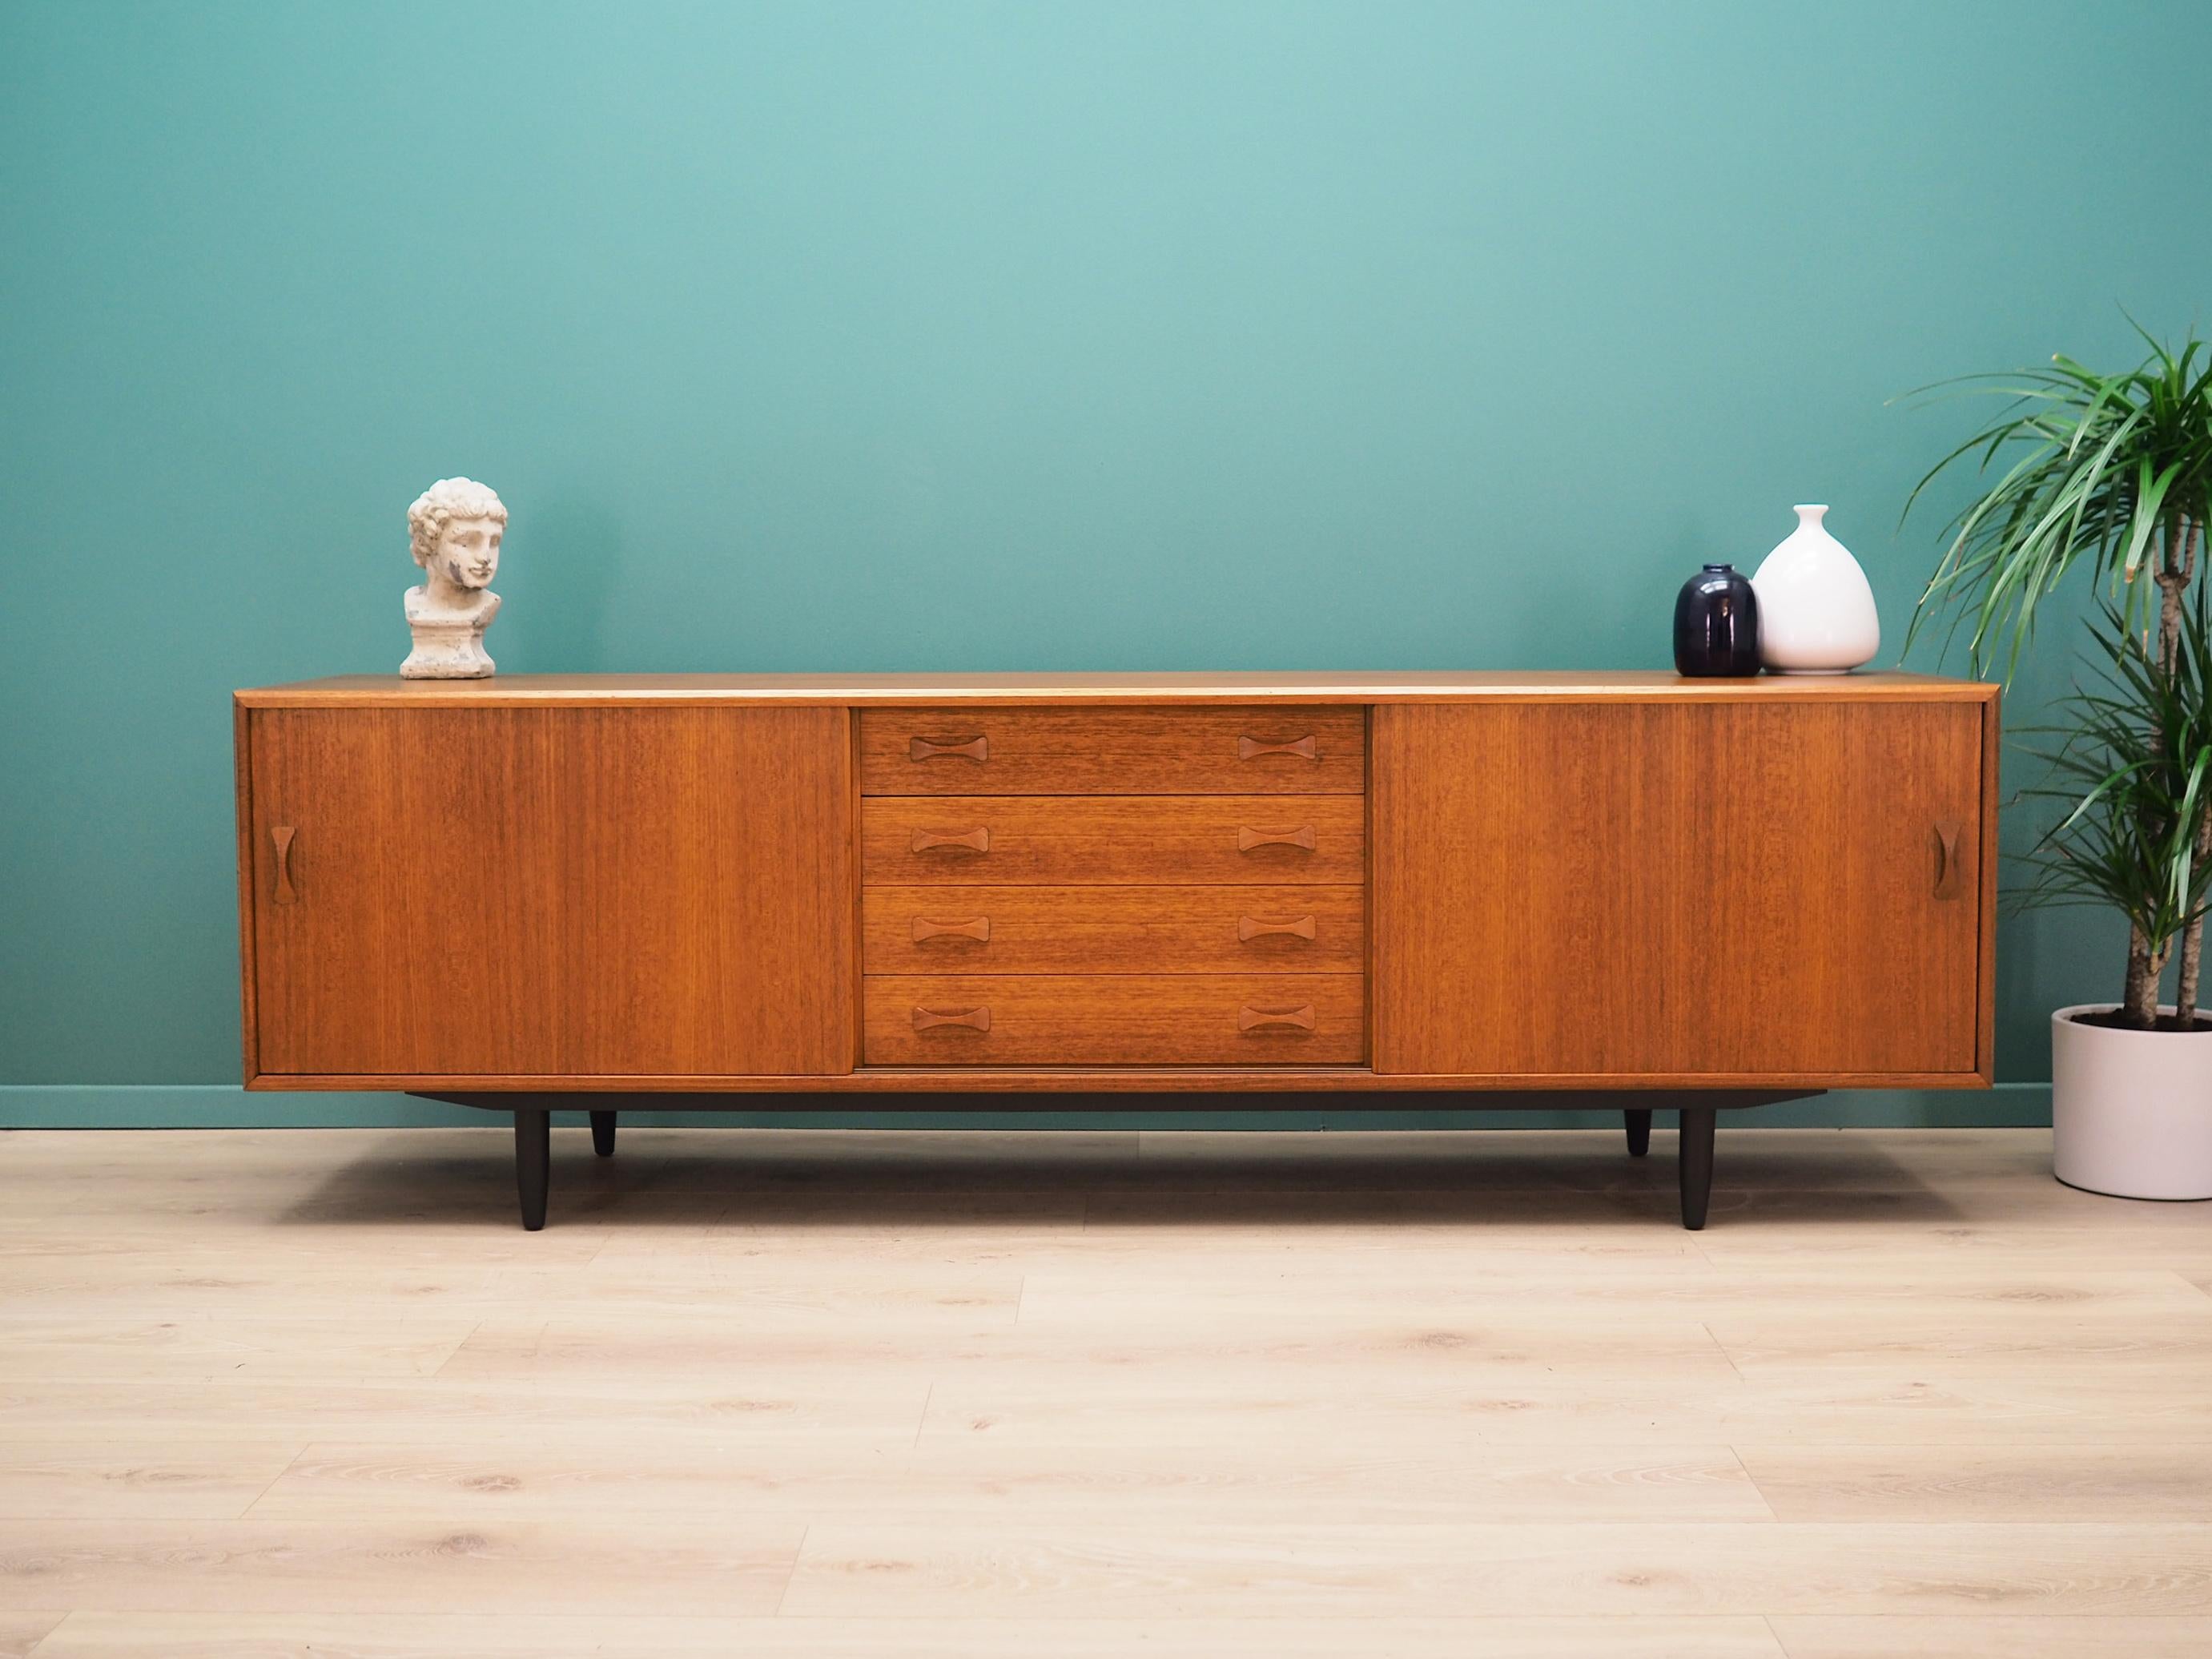 Sideboard was made in the 1960s by a well-known Danish manufacturer Clausen & Søn.

The structure is covered with teak veneer. The legs are made of solid wood stained black. Surface after refreshing. Inside the space has been filled with practical